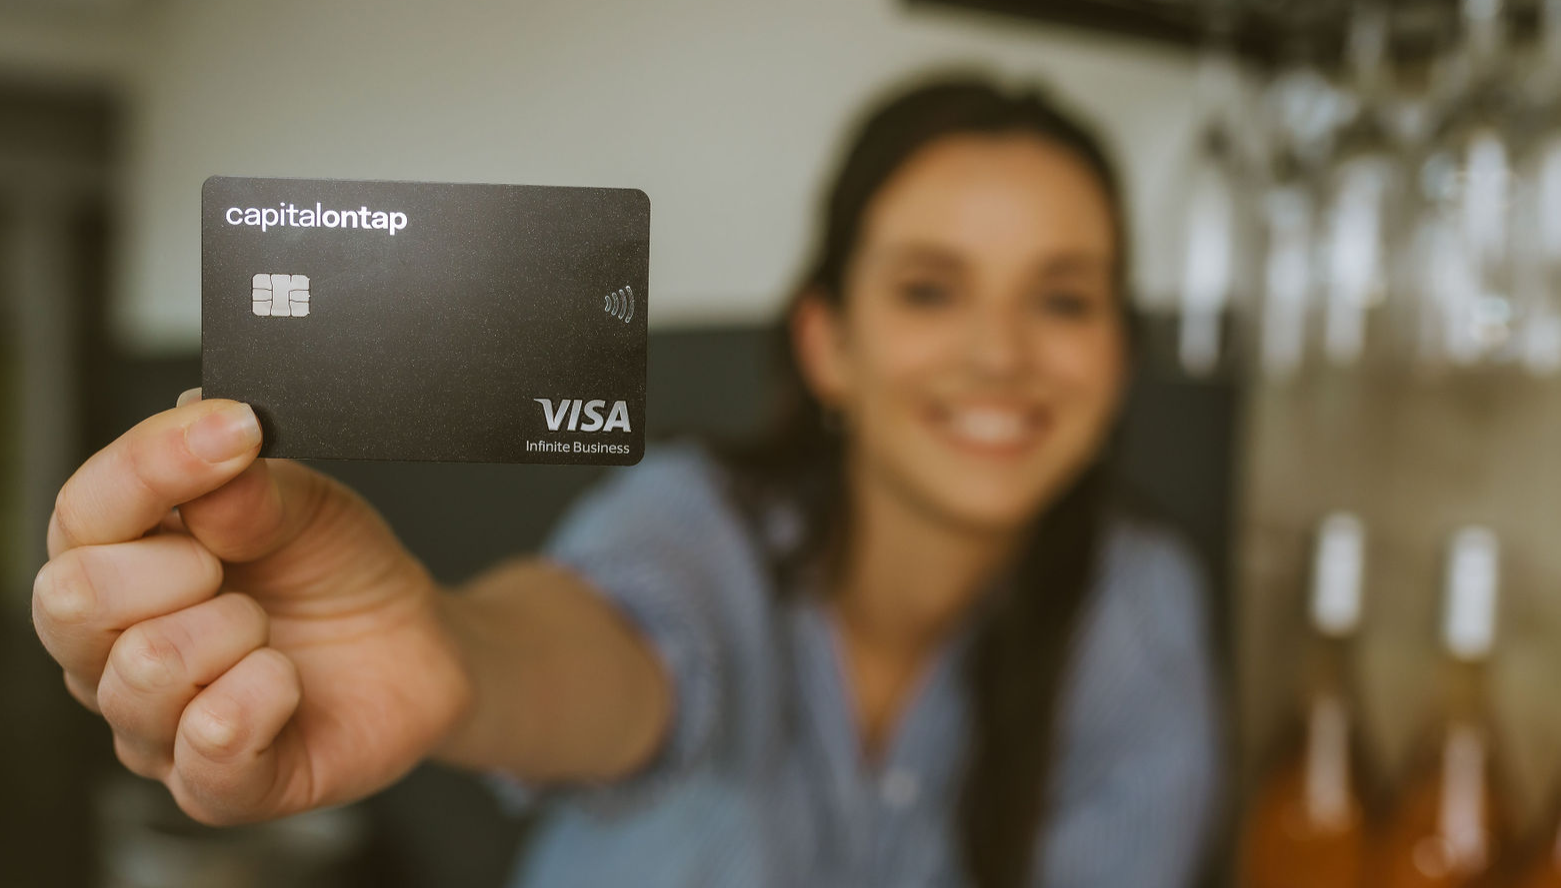 Employee With Capital On Tap Business Credit Card